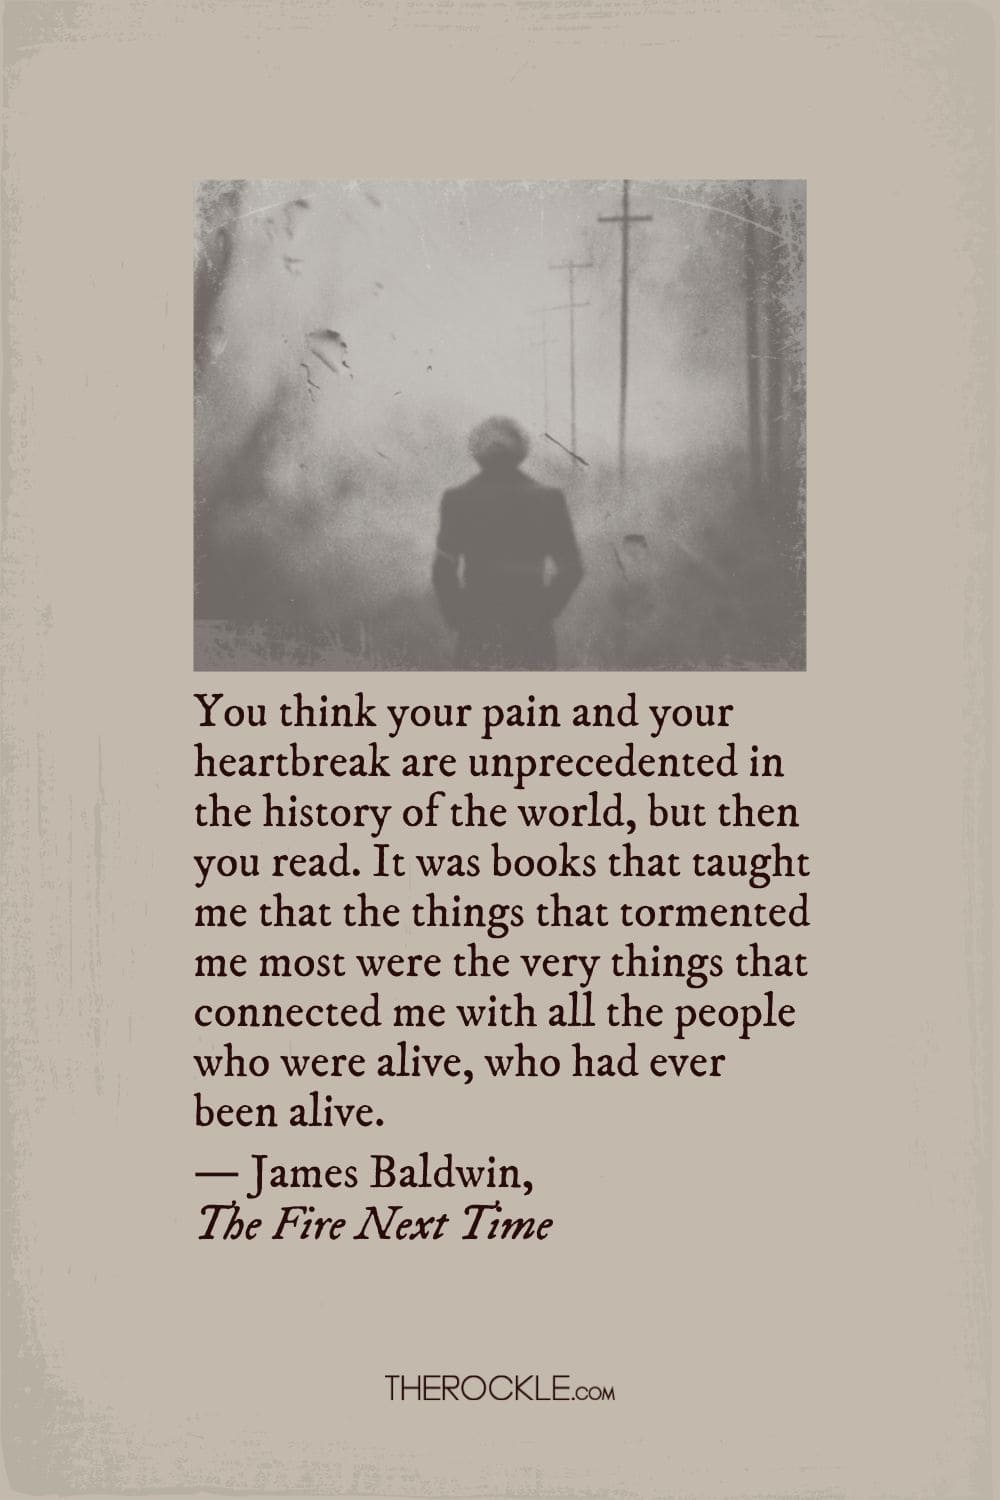 James Baldwin quote about finding solace in literature